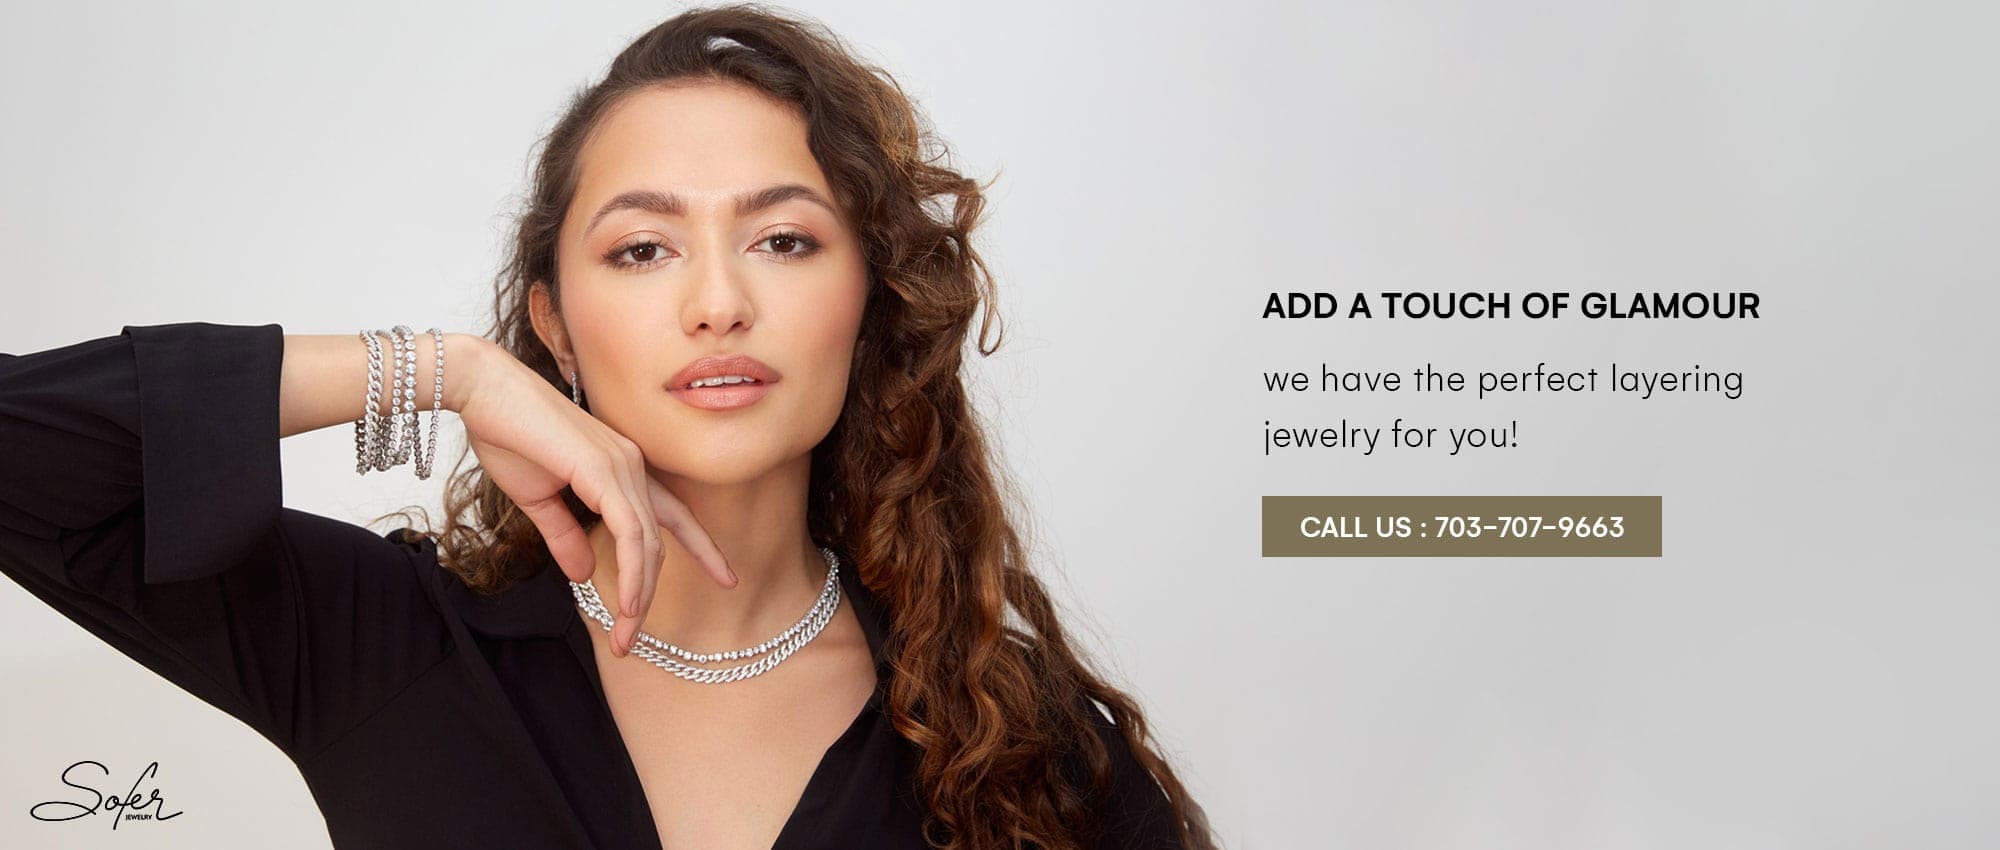 sofer-jewelry-collections-in-herndon-va At Midtown Jewelers